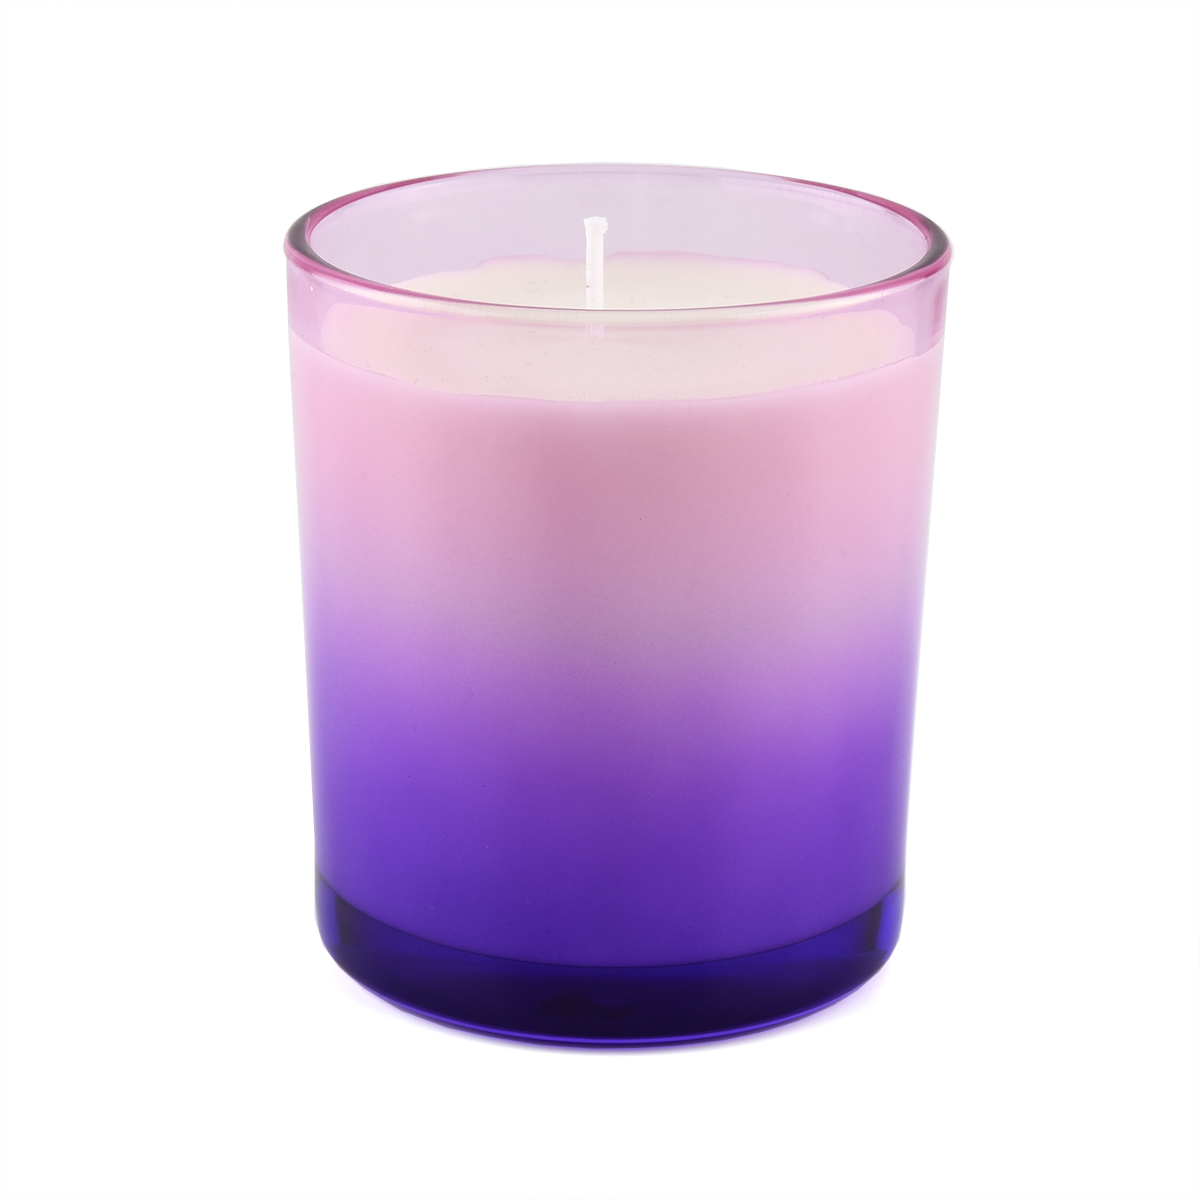 12 oz Ombre Purple Pink Glass Candle Holders